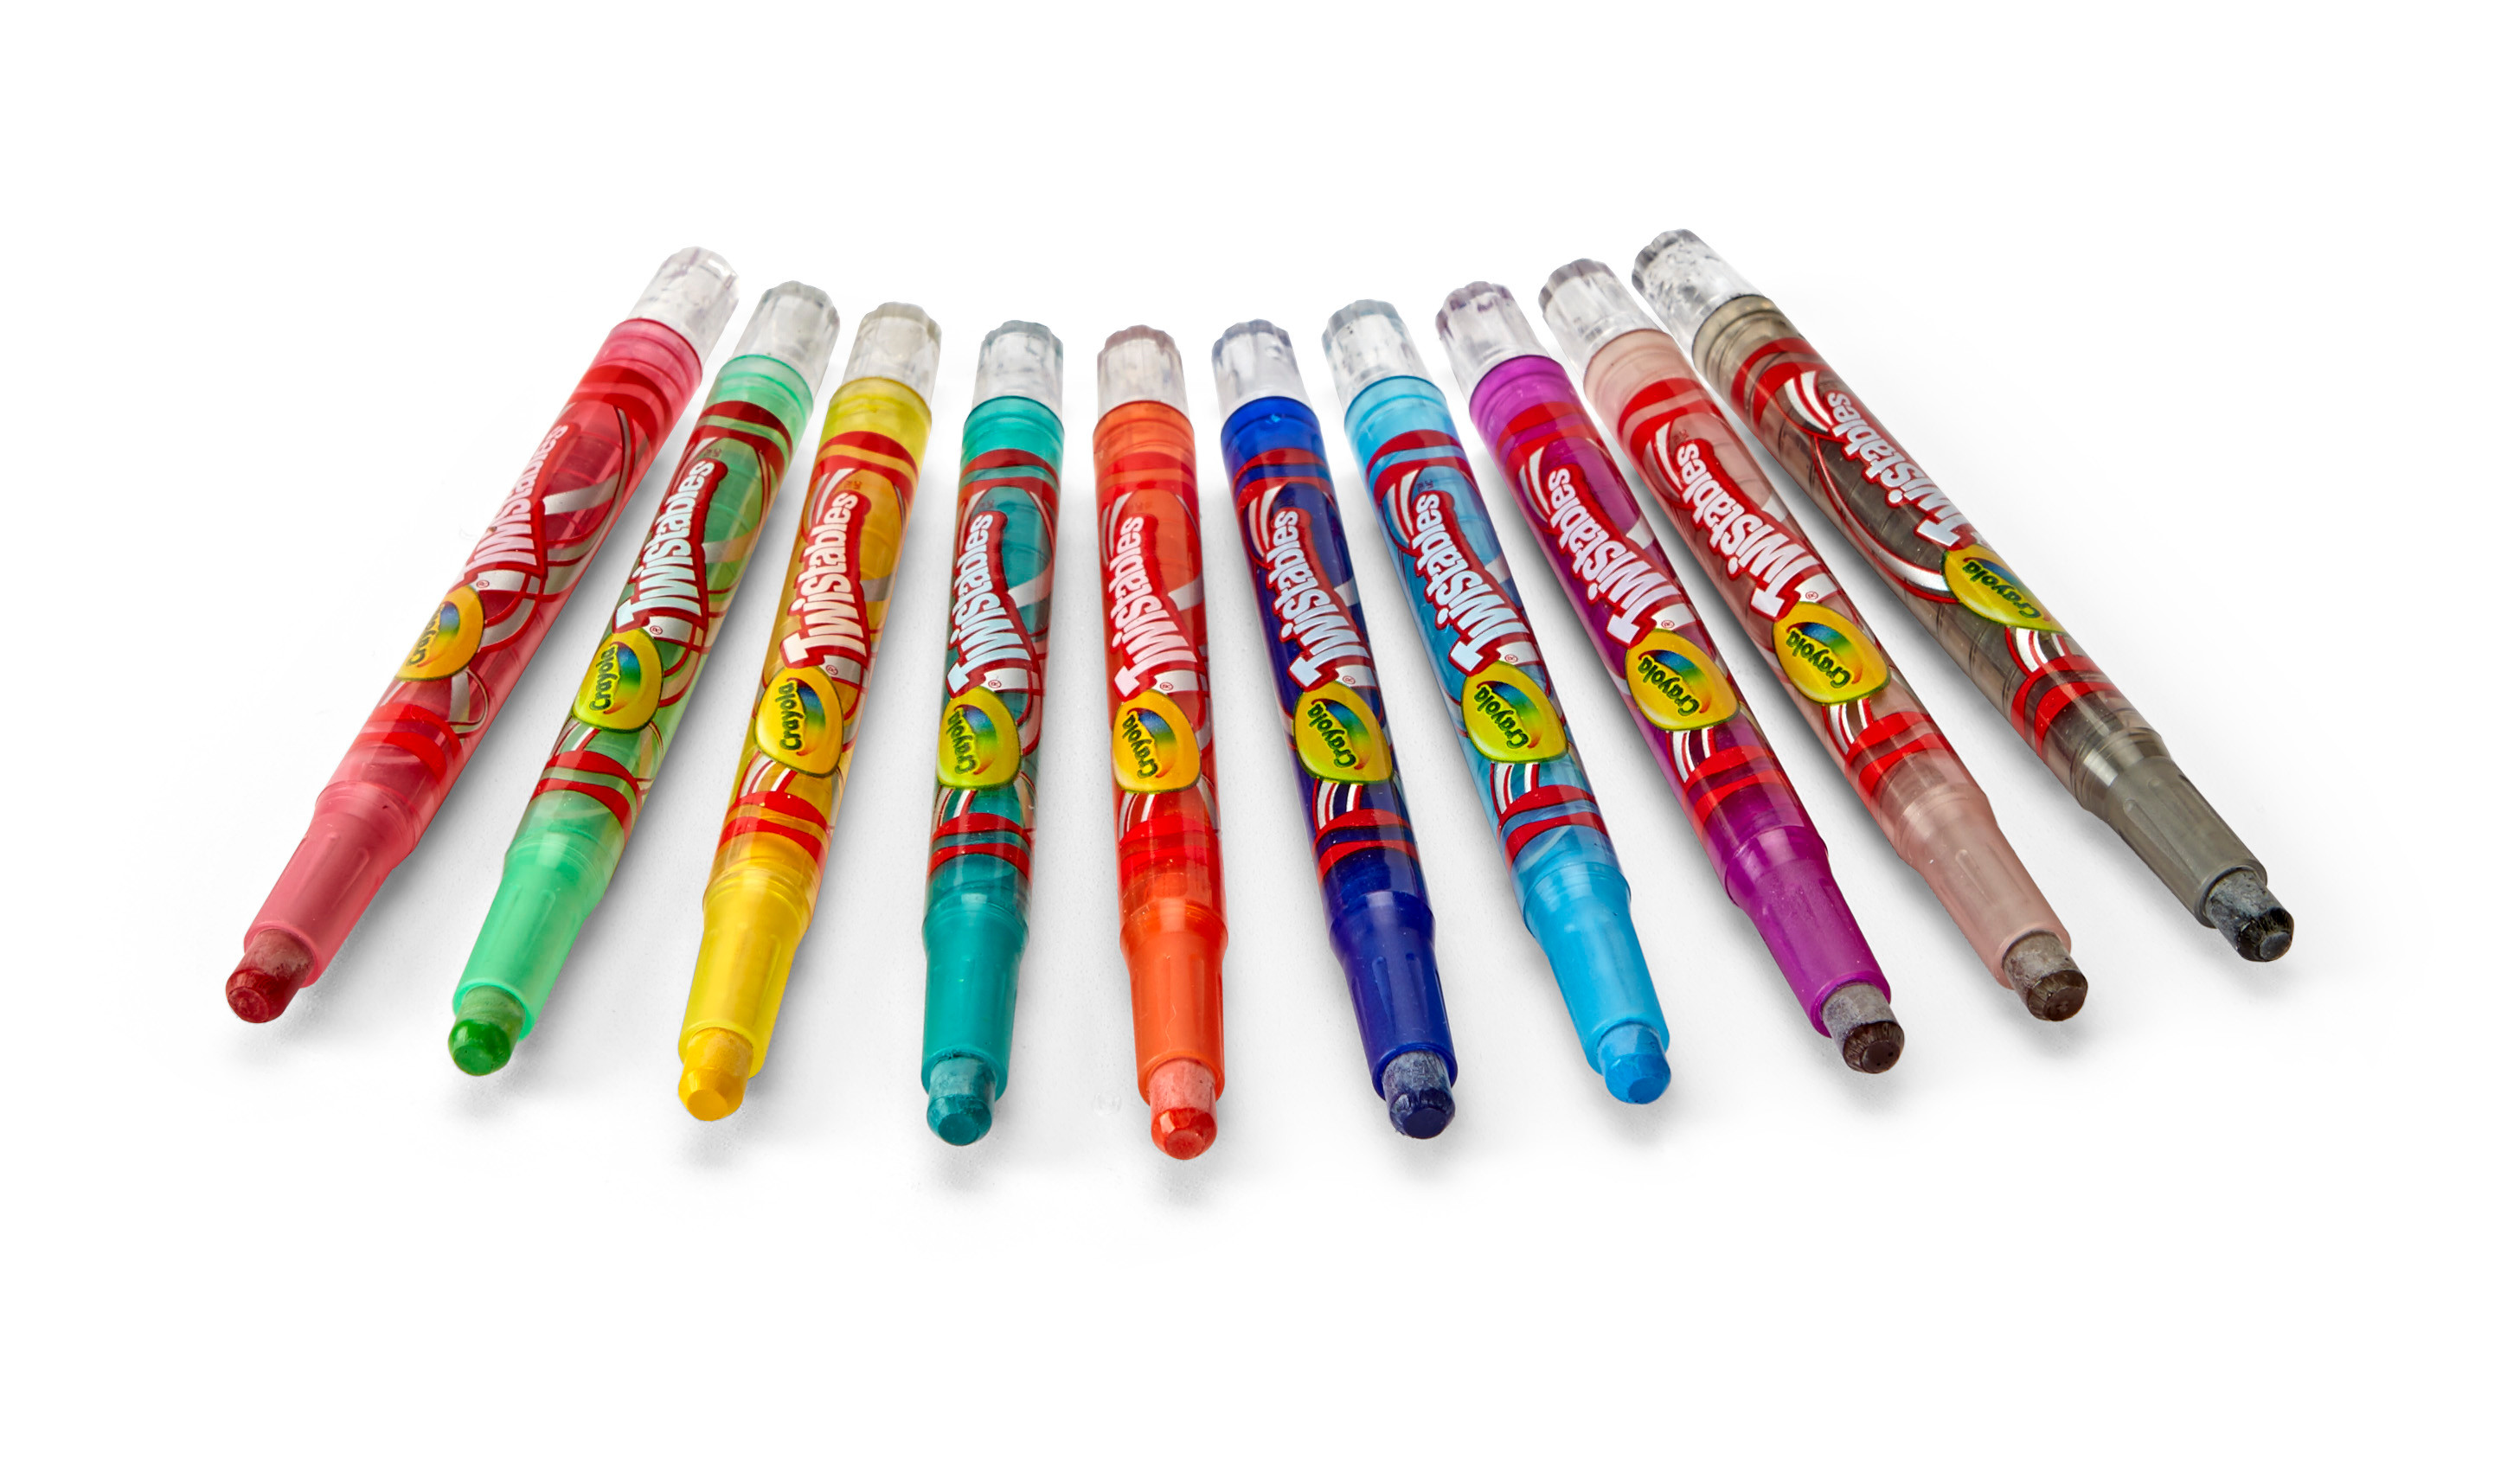 Crayola Mini-Twistables Crayons, 10 Count, Assorted Colors - image 5 of 6